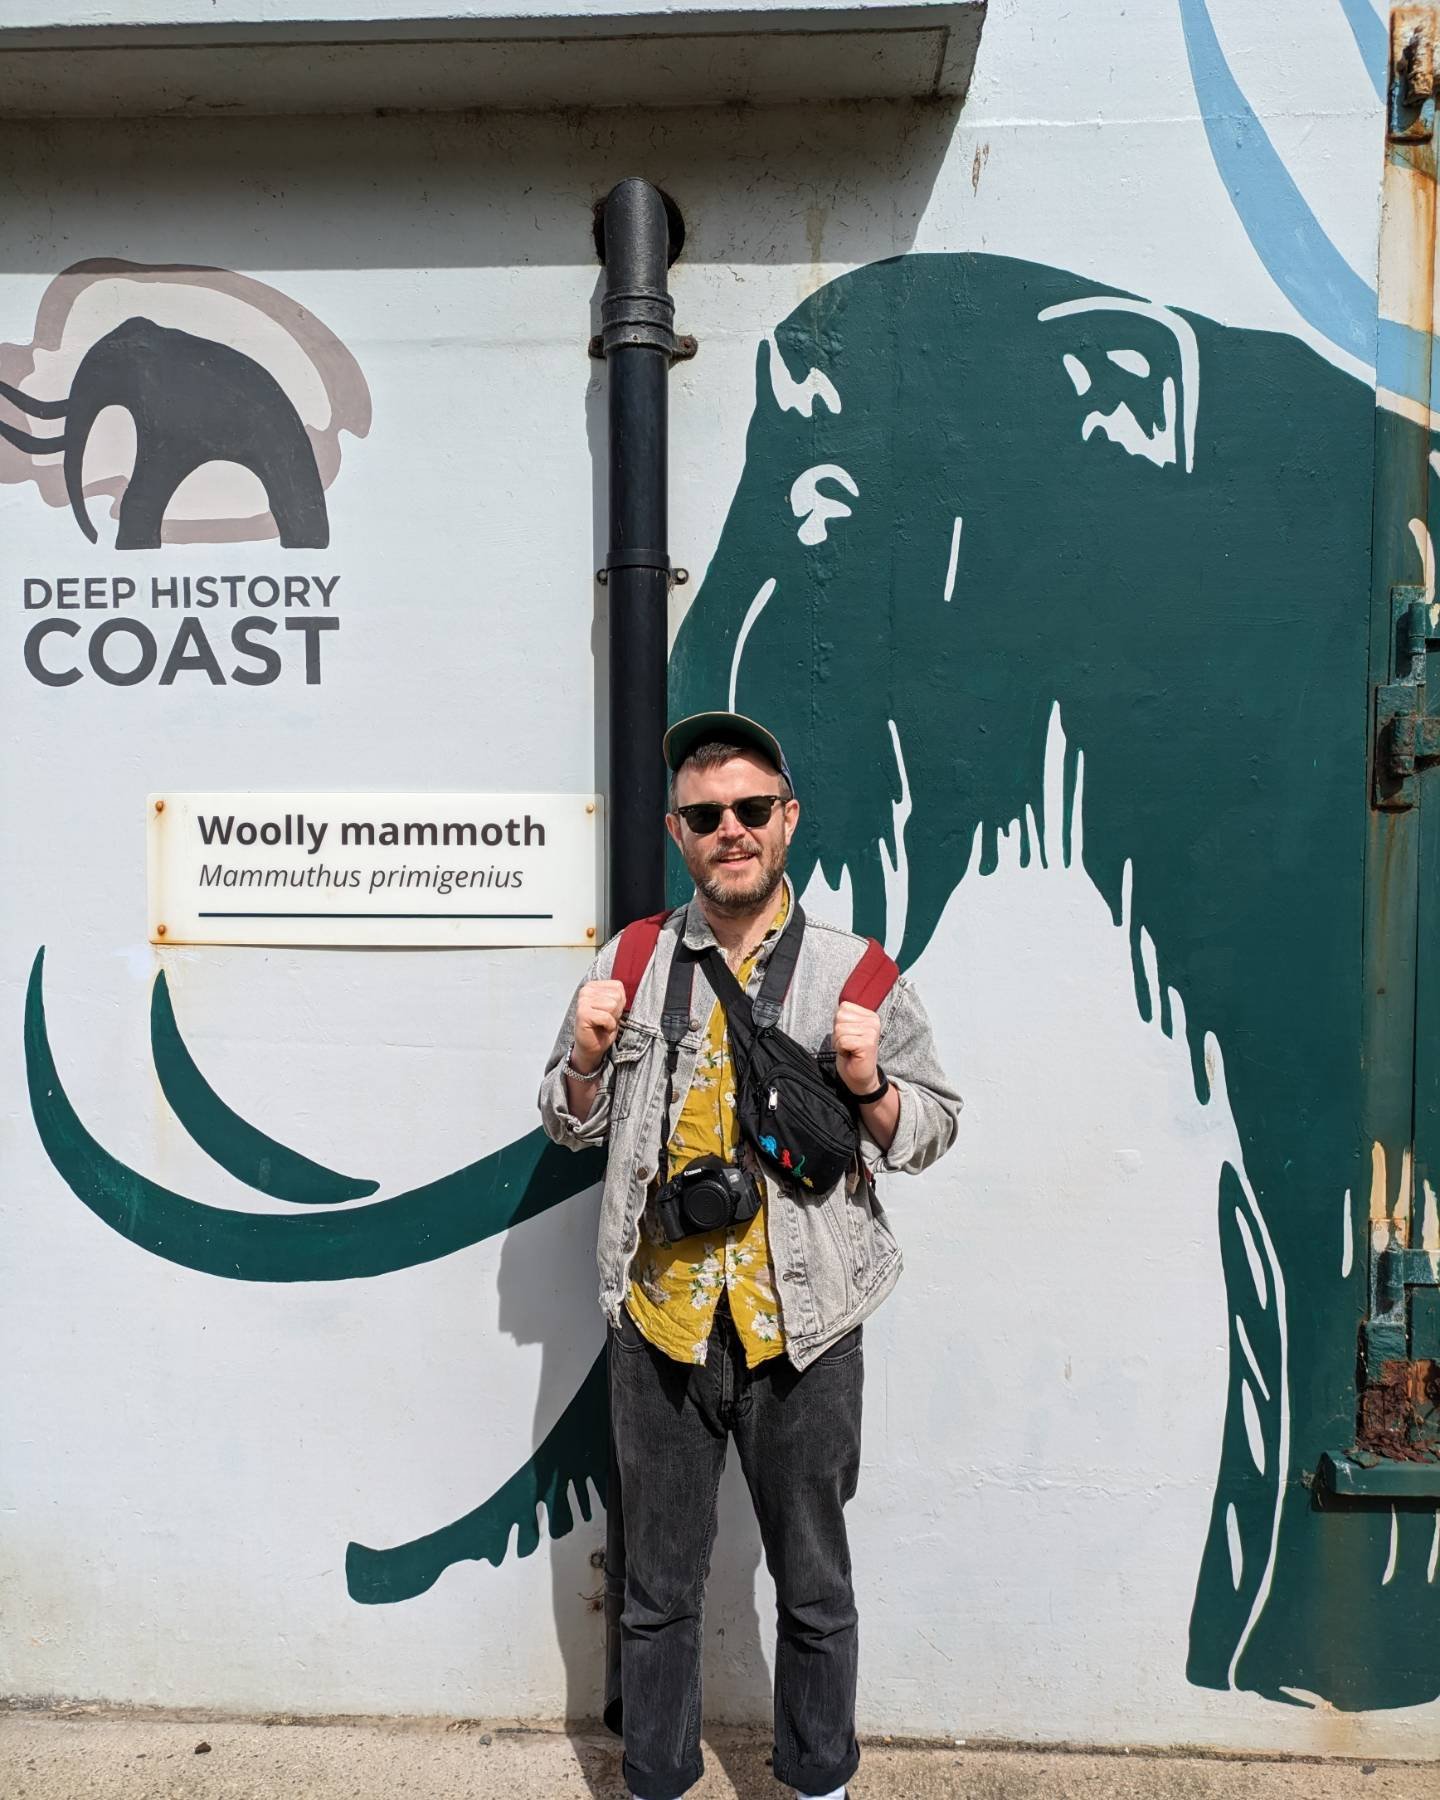 I've been doing prehistoric megafauna research ahead of our May Shows IN

BRIGHTON - 5TH MAY
LONDON - 6TH MAY
BRISTOL -10TH MAY

Get tickets for any of those through the link in our bio!